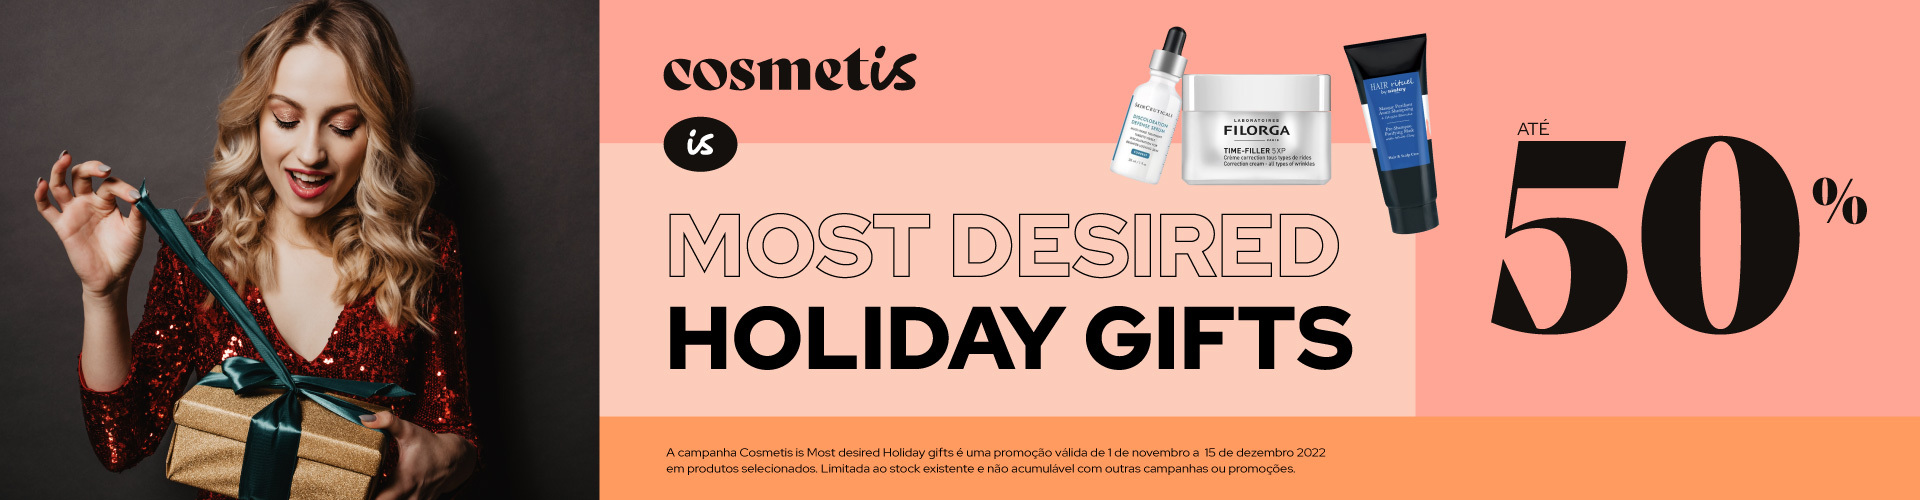 Cosmetis is Most desired holiday gifts